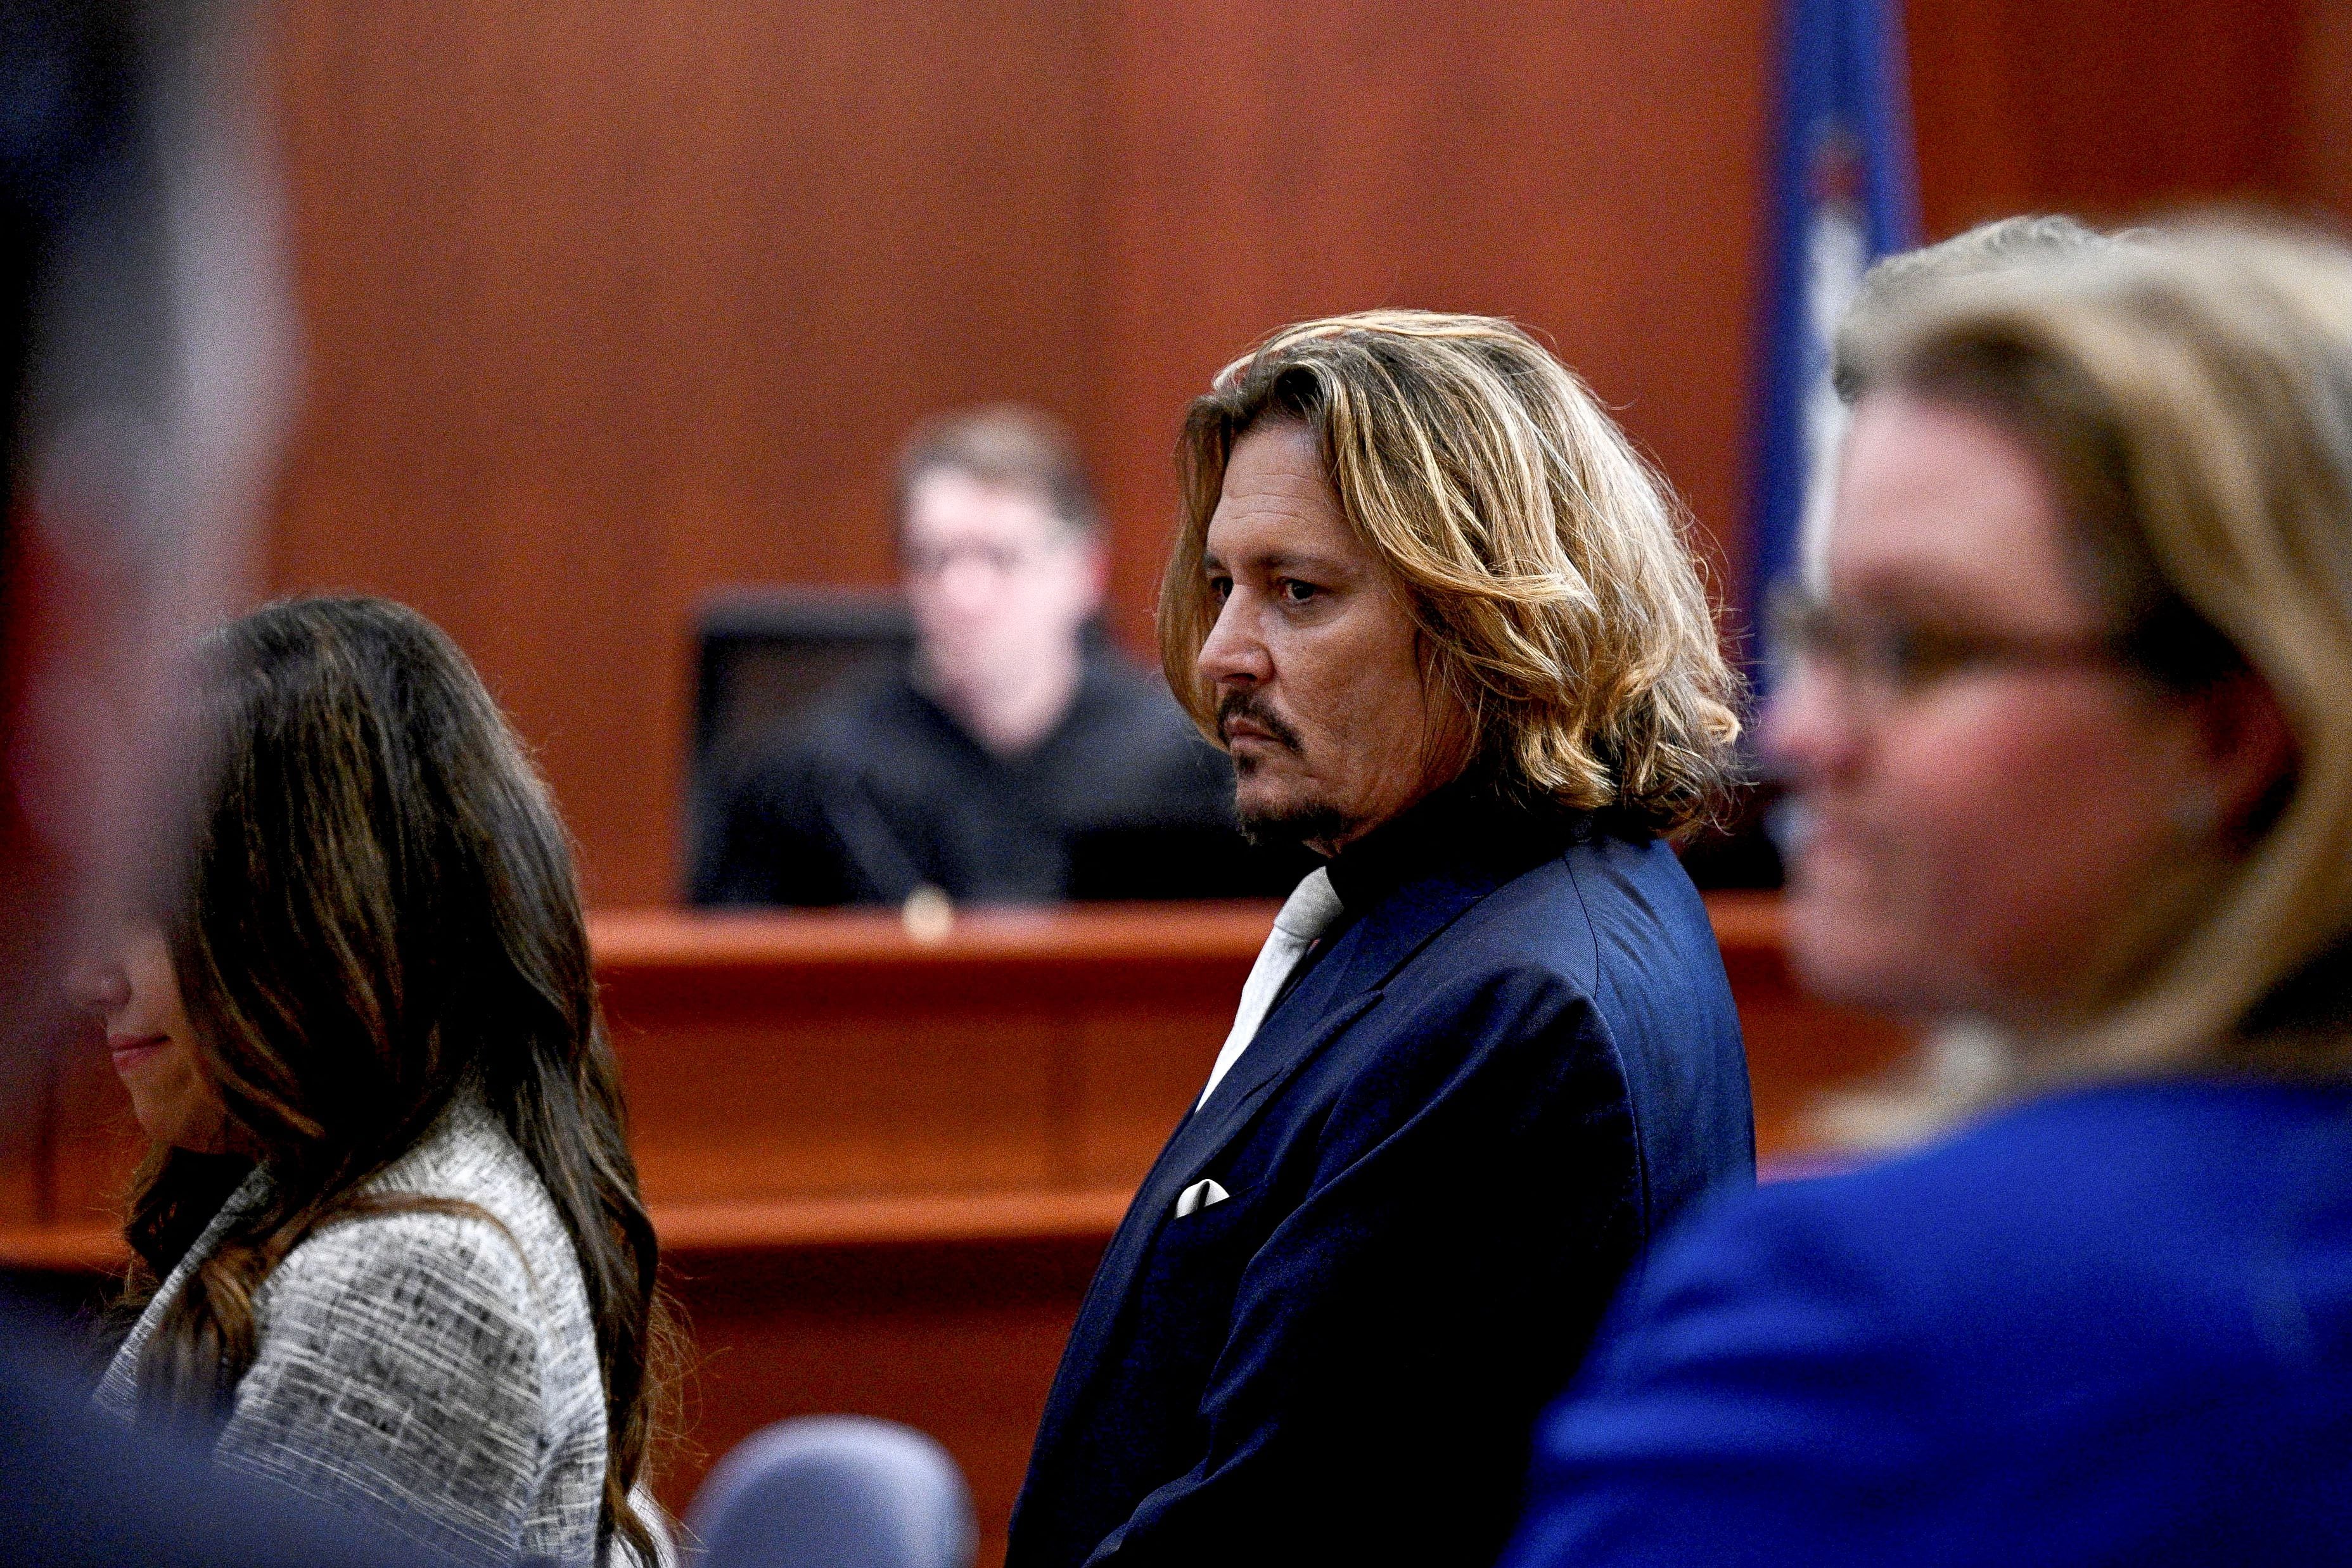 Actor Johnny Depp sits in the courtroom during his defamation case against Amber Heard at Fairfax County Circuit Court, Virginia, U.S., April 12, 2022. Brendan Smialowski/Pool via REUTERS